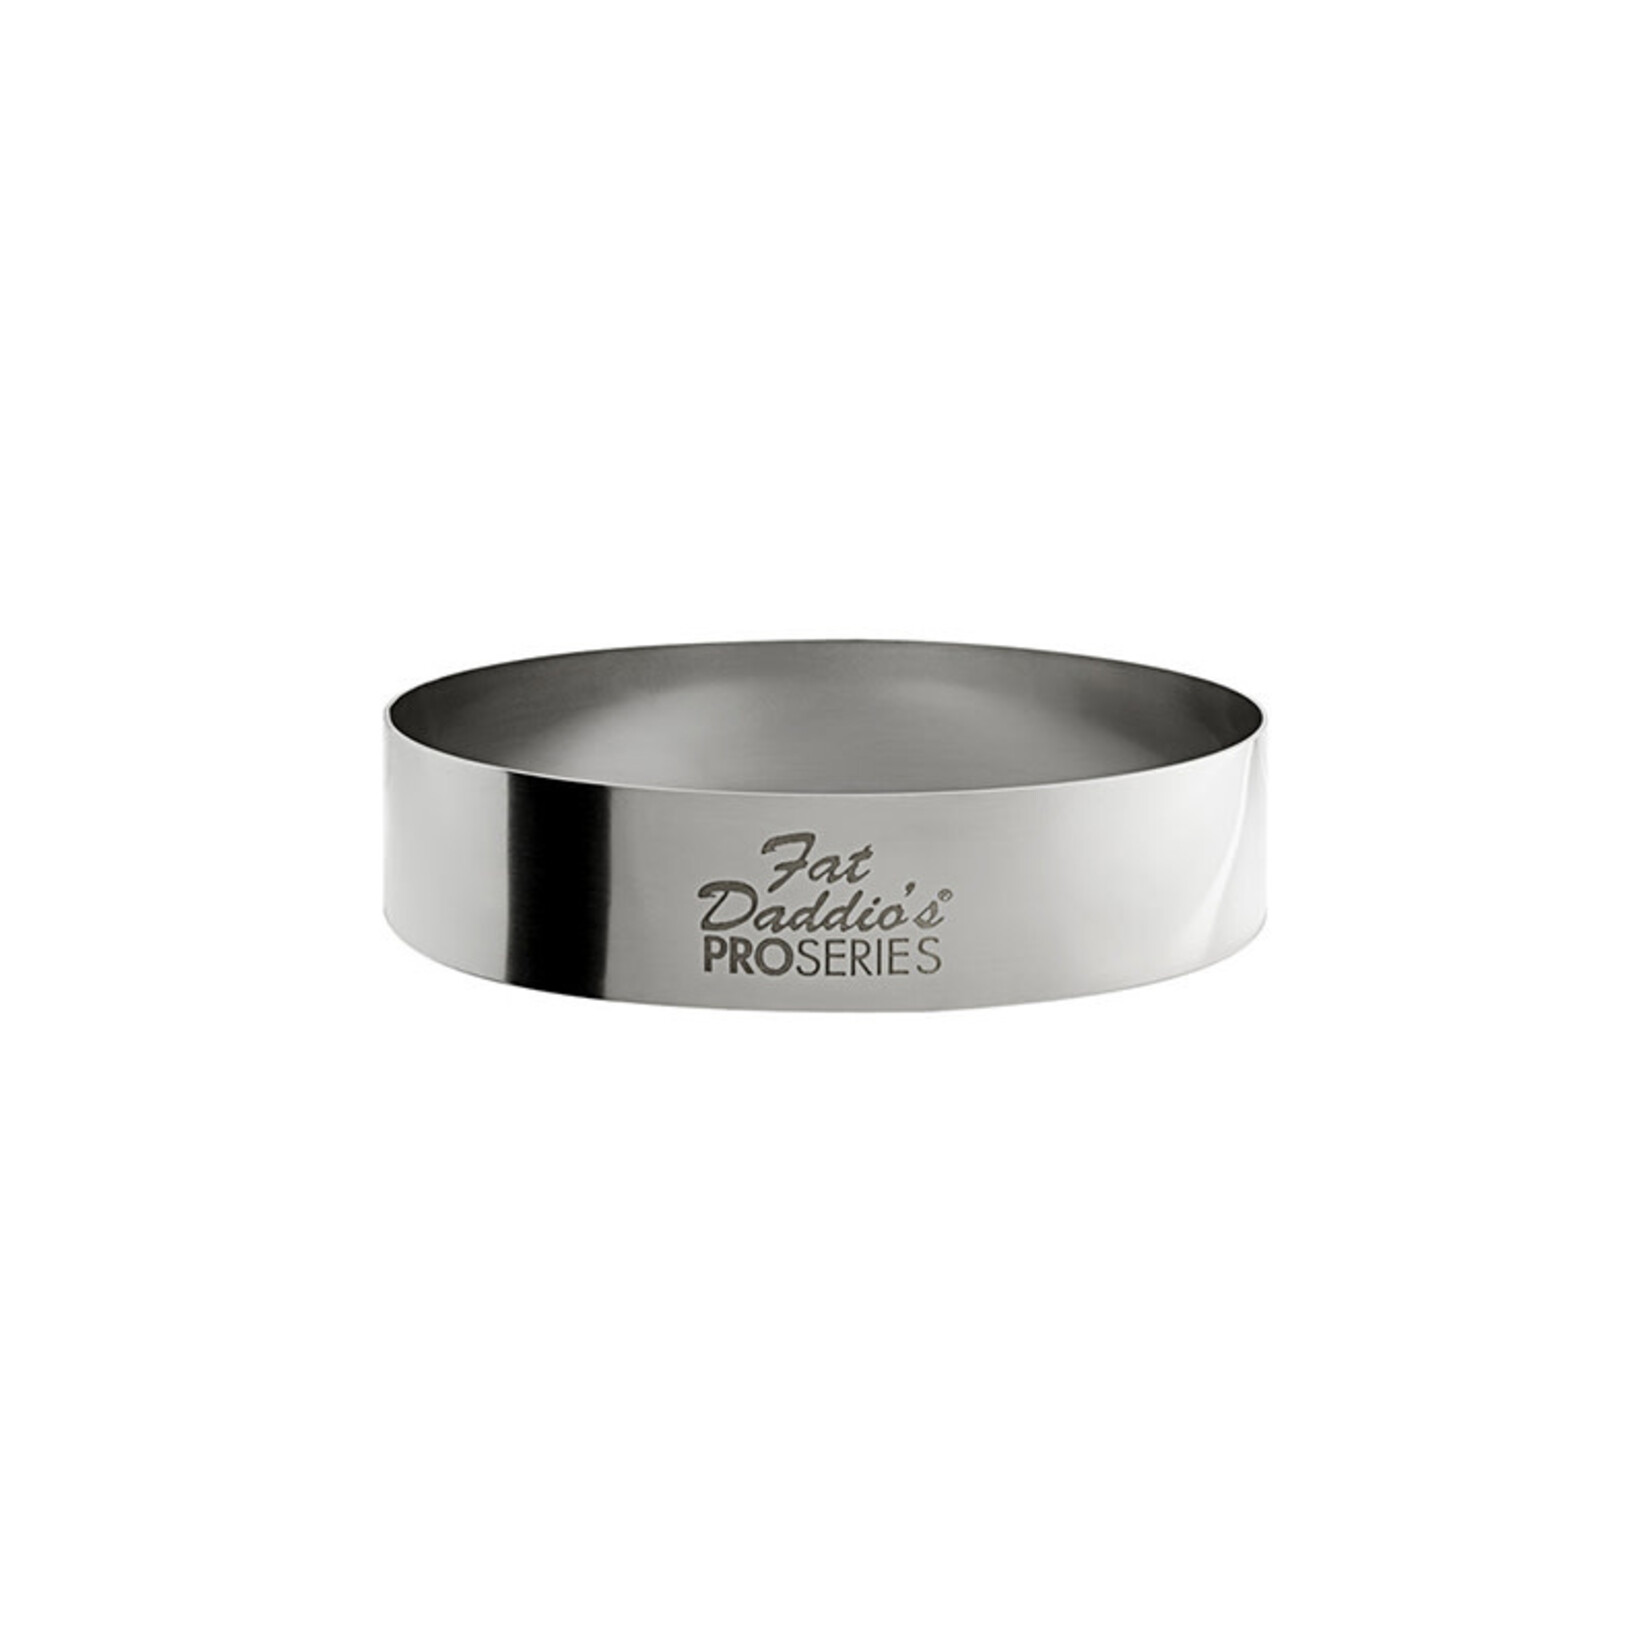 Fat Daddios Fat Daddios - Ring Stainless Steel - 3 x 0.75"